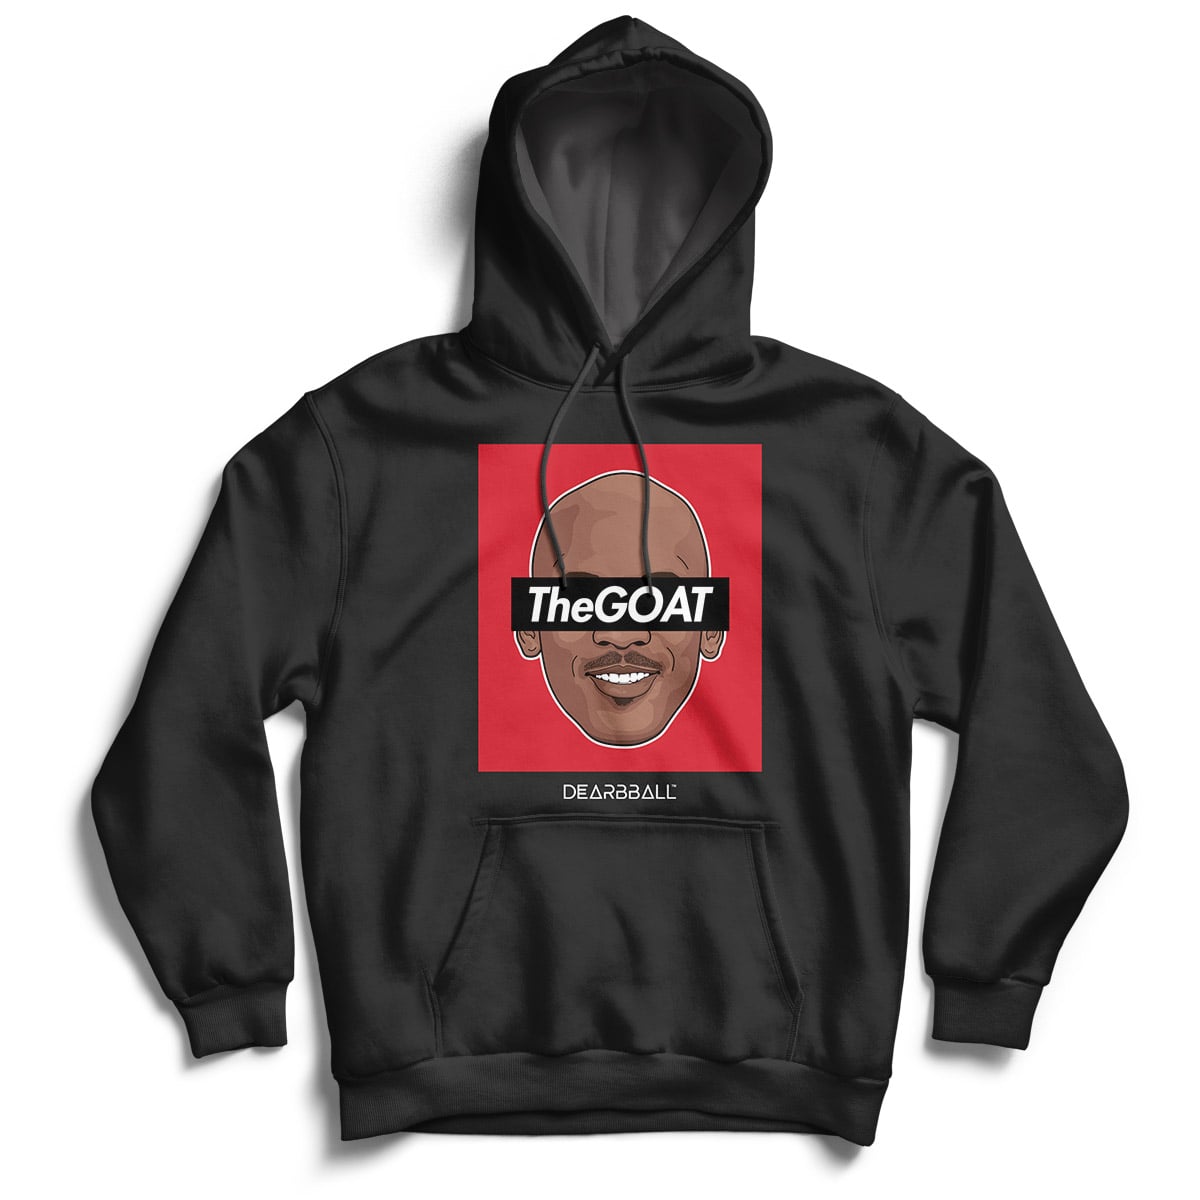 [ENFANT] DearBBall Sweat à Capuche - TheGOAT Red Edition